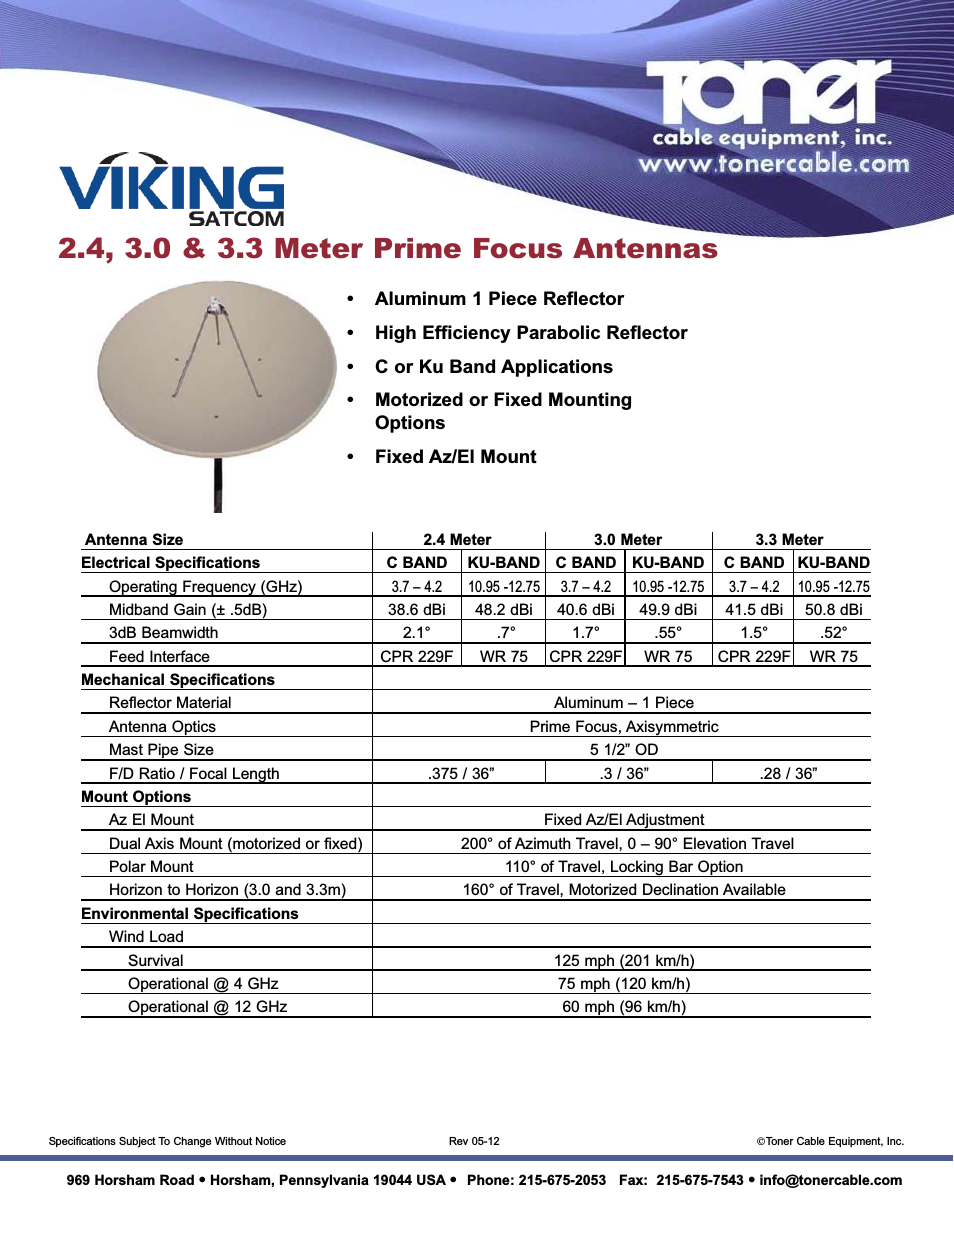 3.3 Meter Prime Focus Antenna with High Efficiency Parabolic Reflector